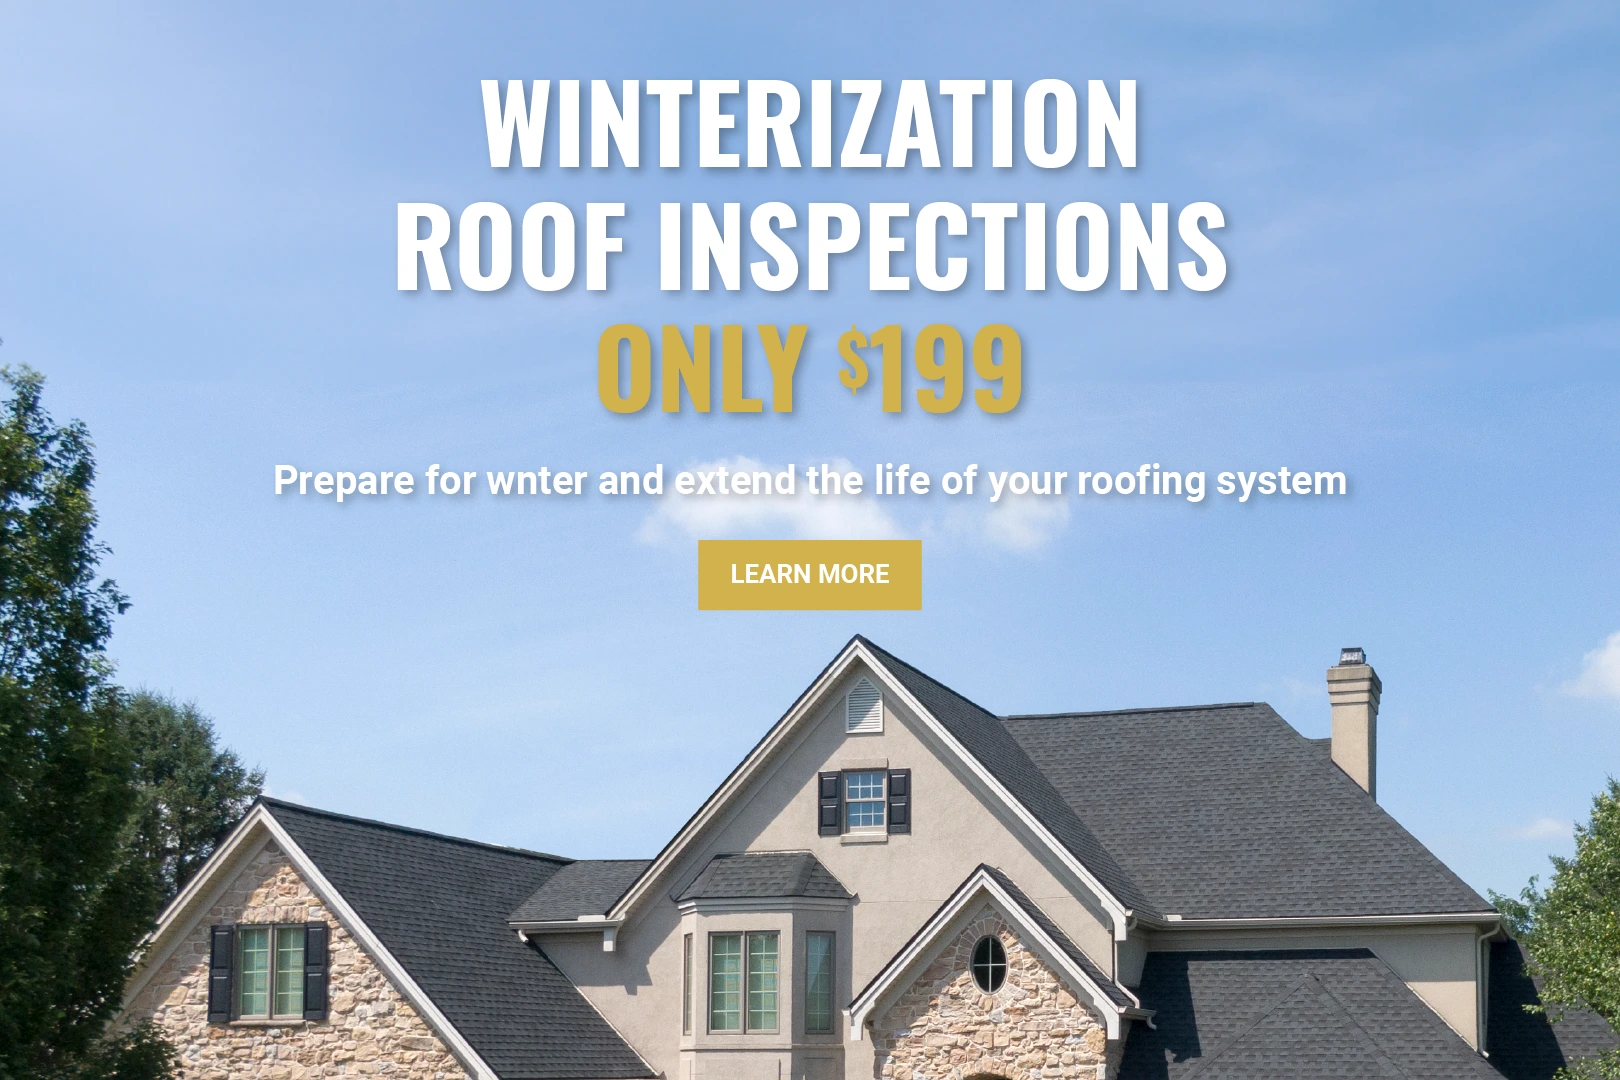 Winterization Roof Inspections.